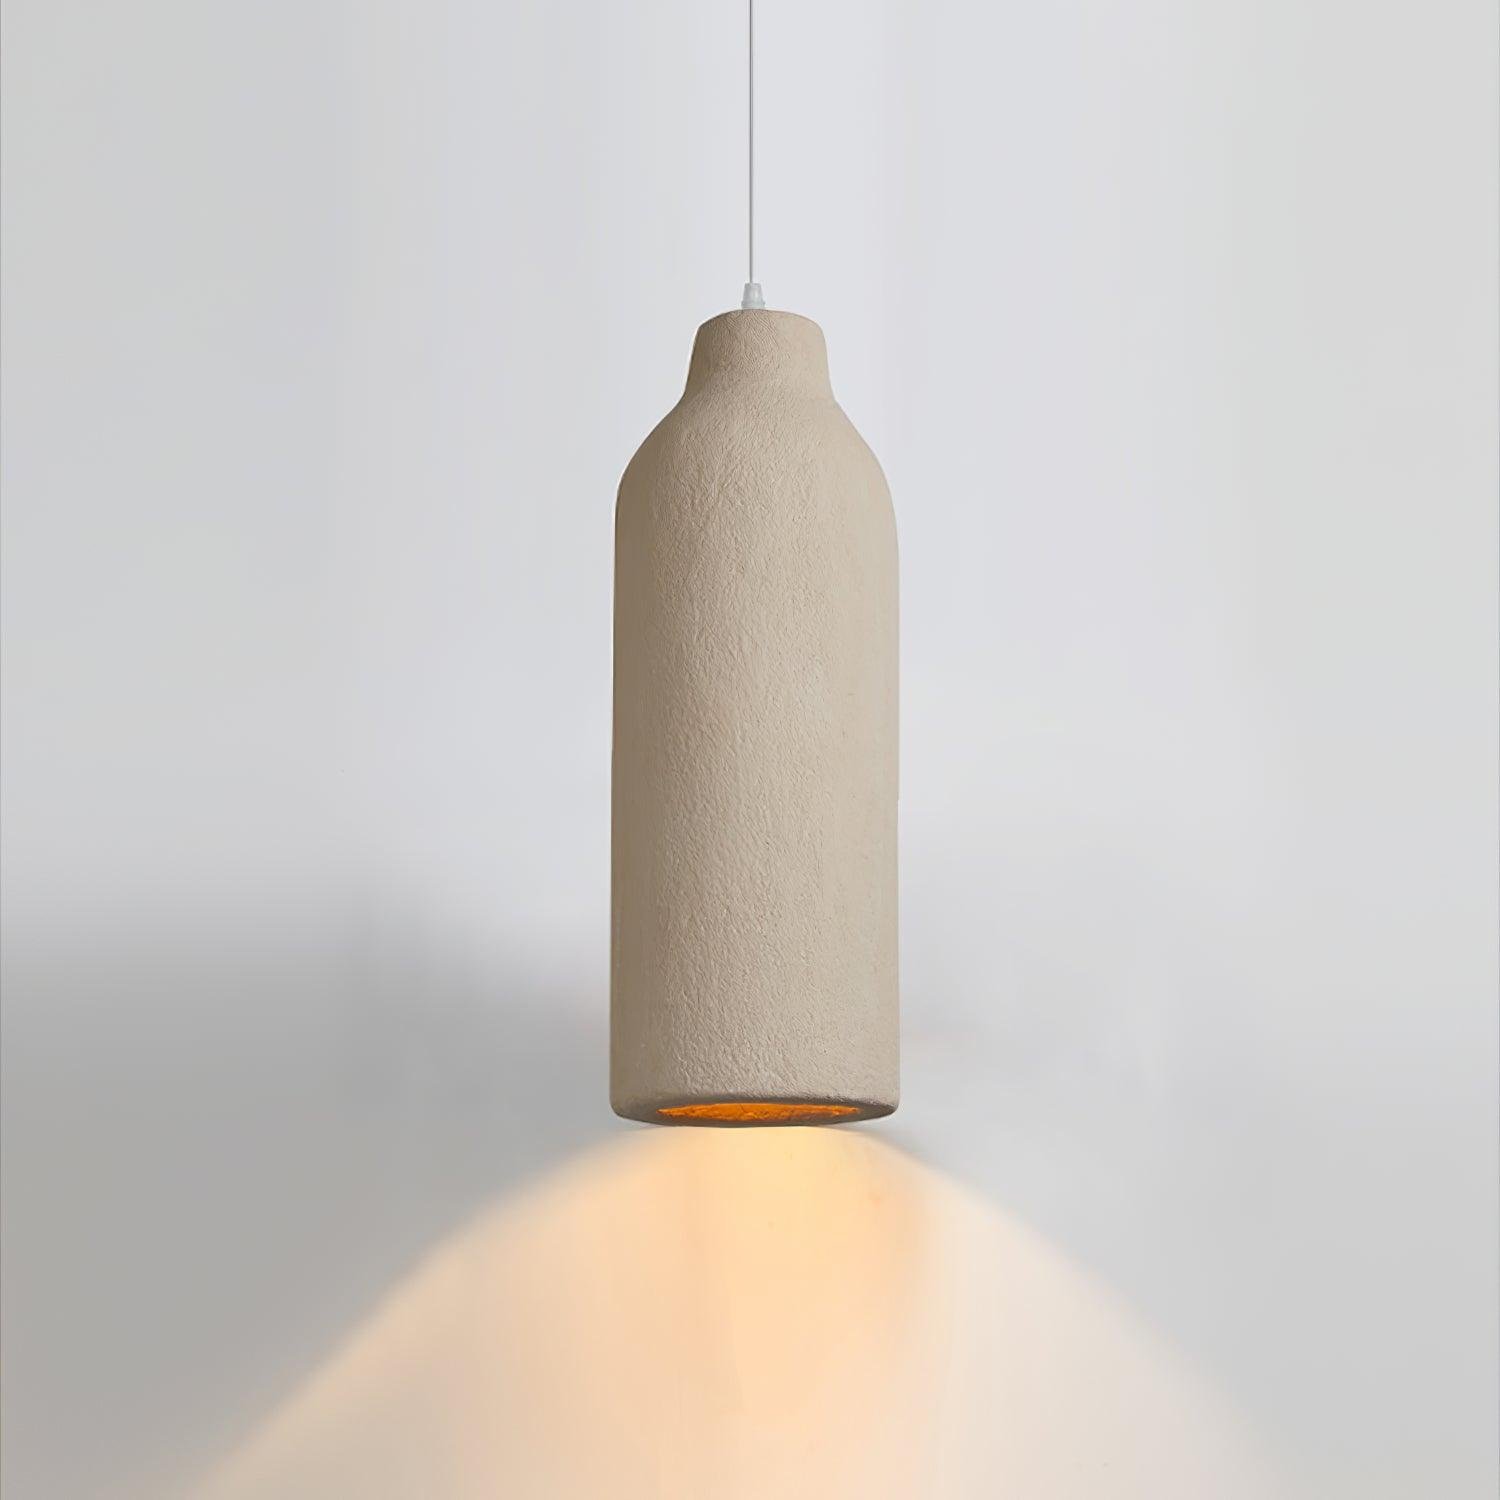 Brown Pendant Light with a diameter of 7.1 inches and a height of 19.7 inches (18cm x 50cm)